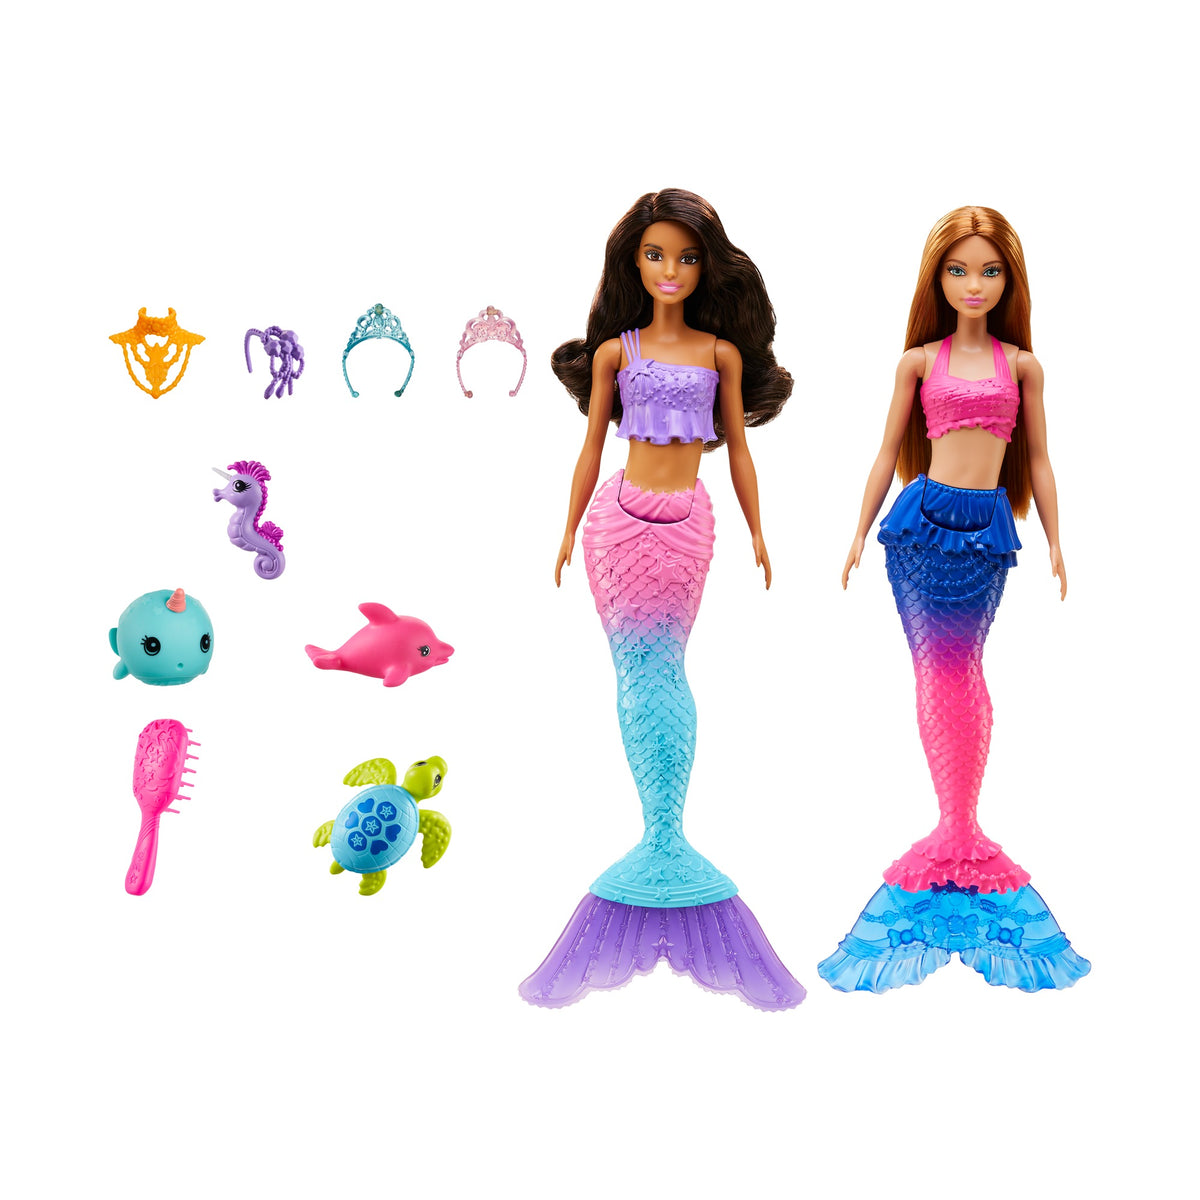 Barbie Brunette Mermaid Set Dolls with Colorful Clothes & Accessories for Kids Ages 3+